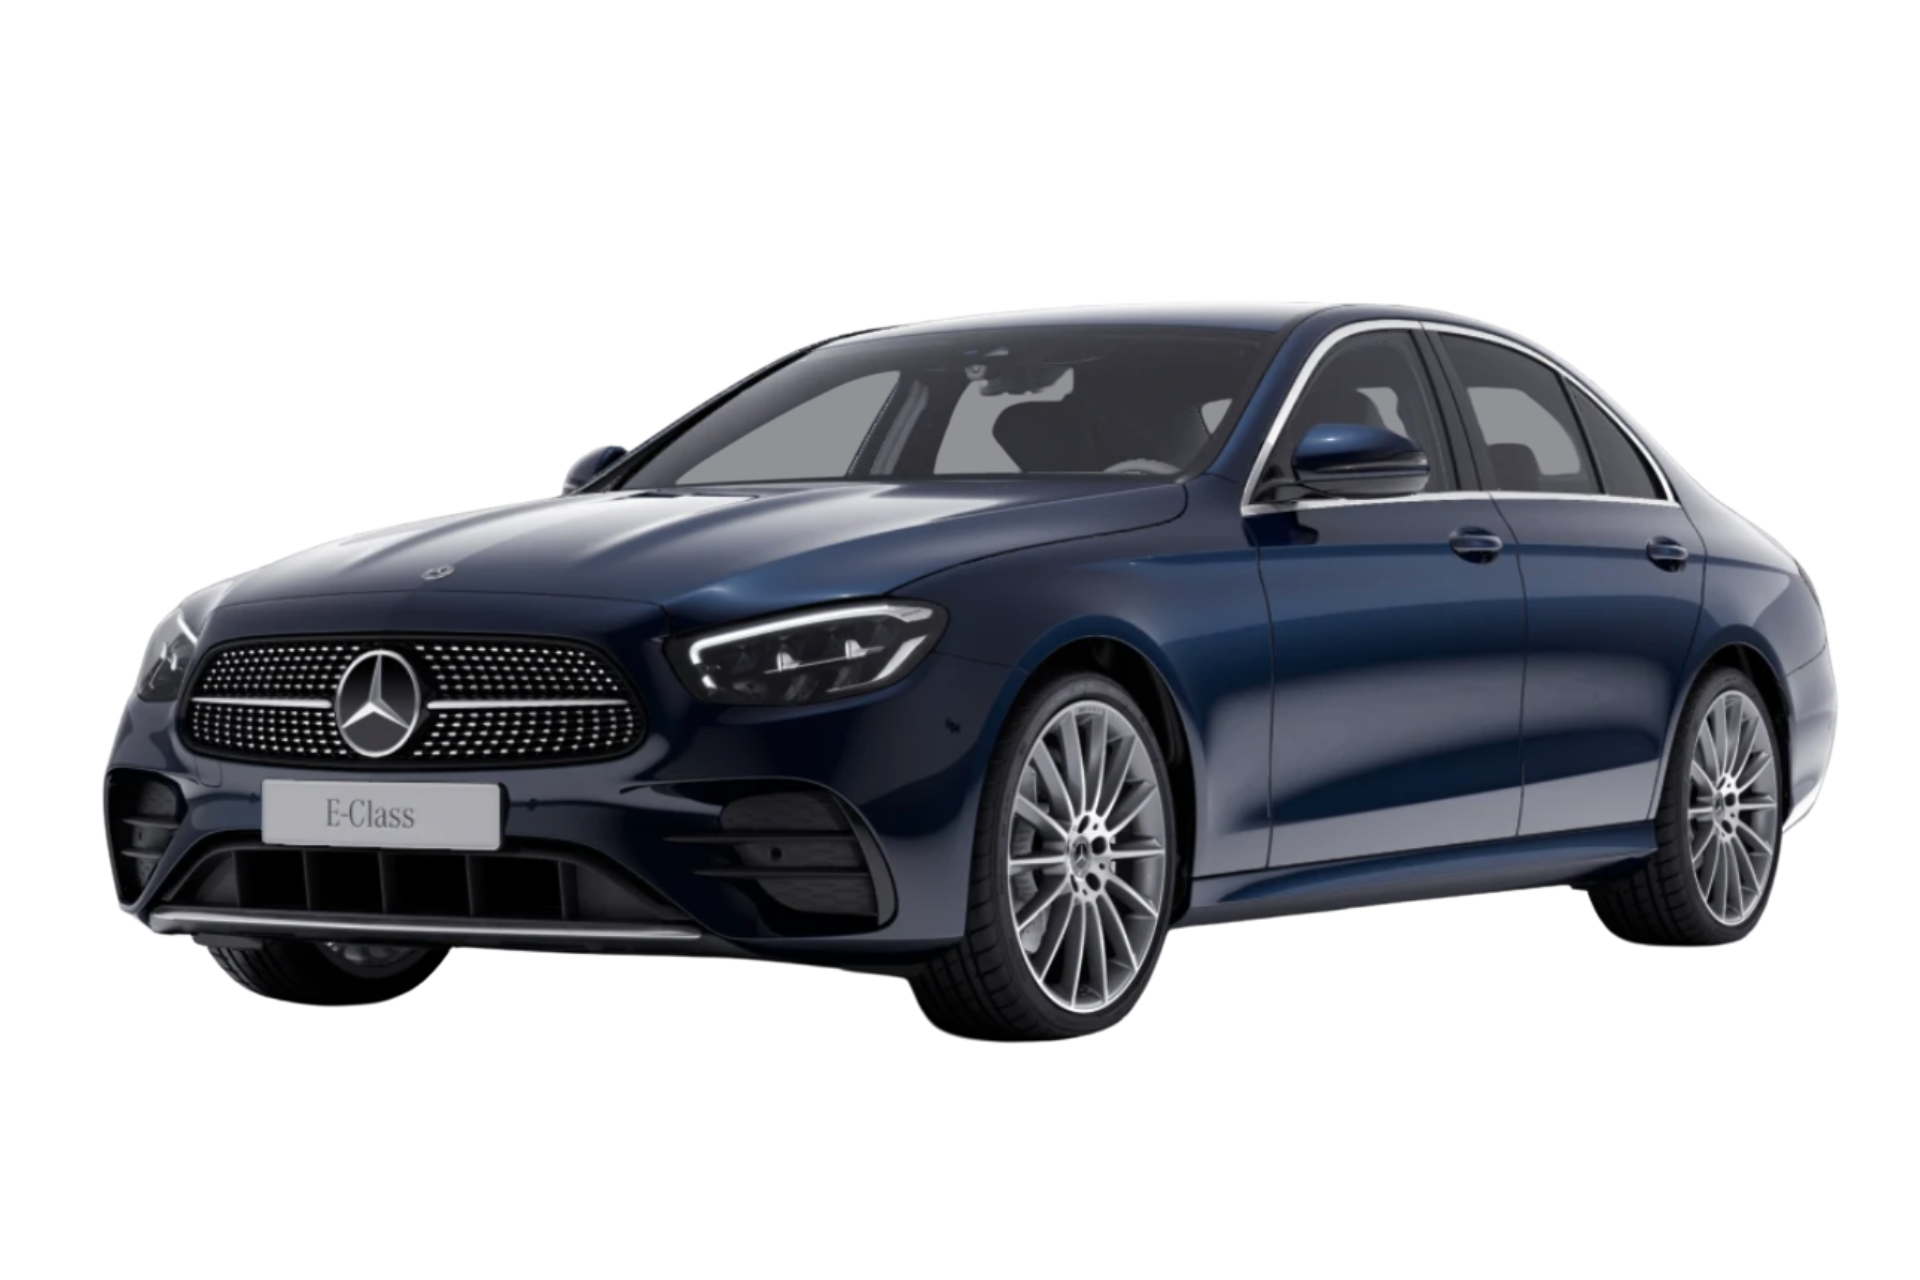 Charging your Mercedes E-Class Plug-in Hybrid